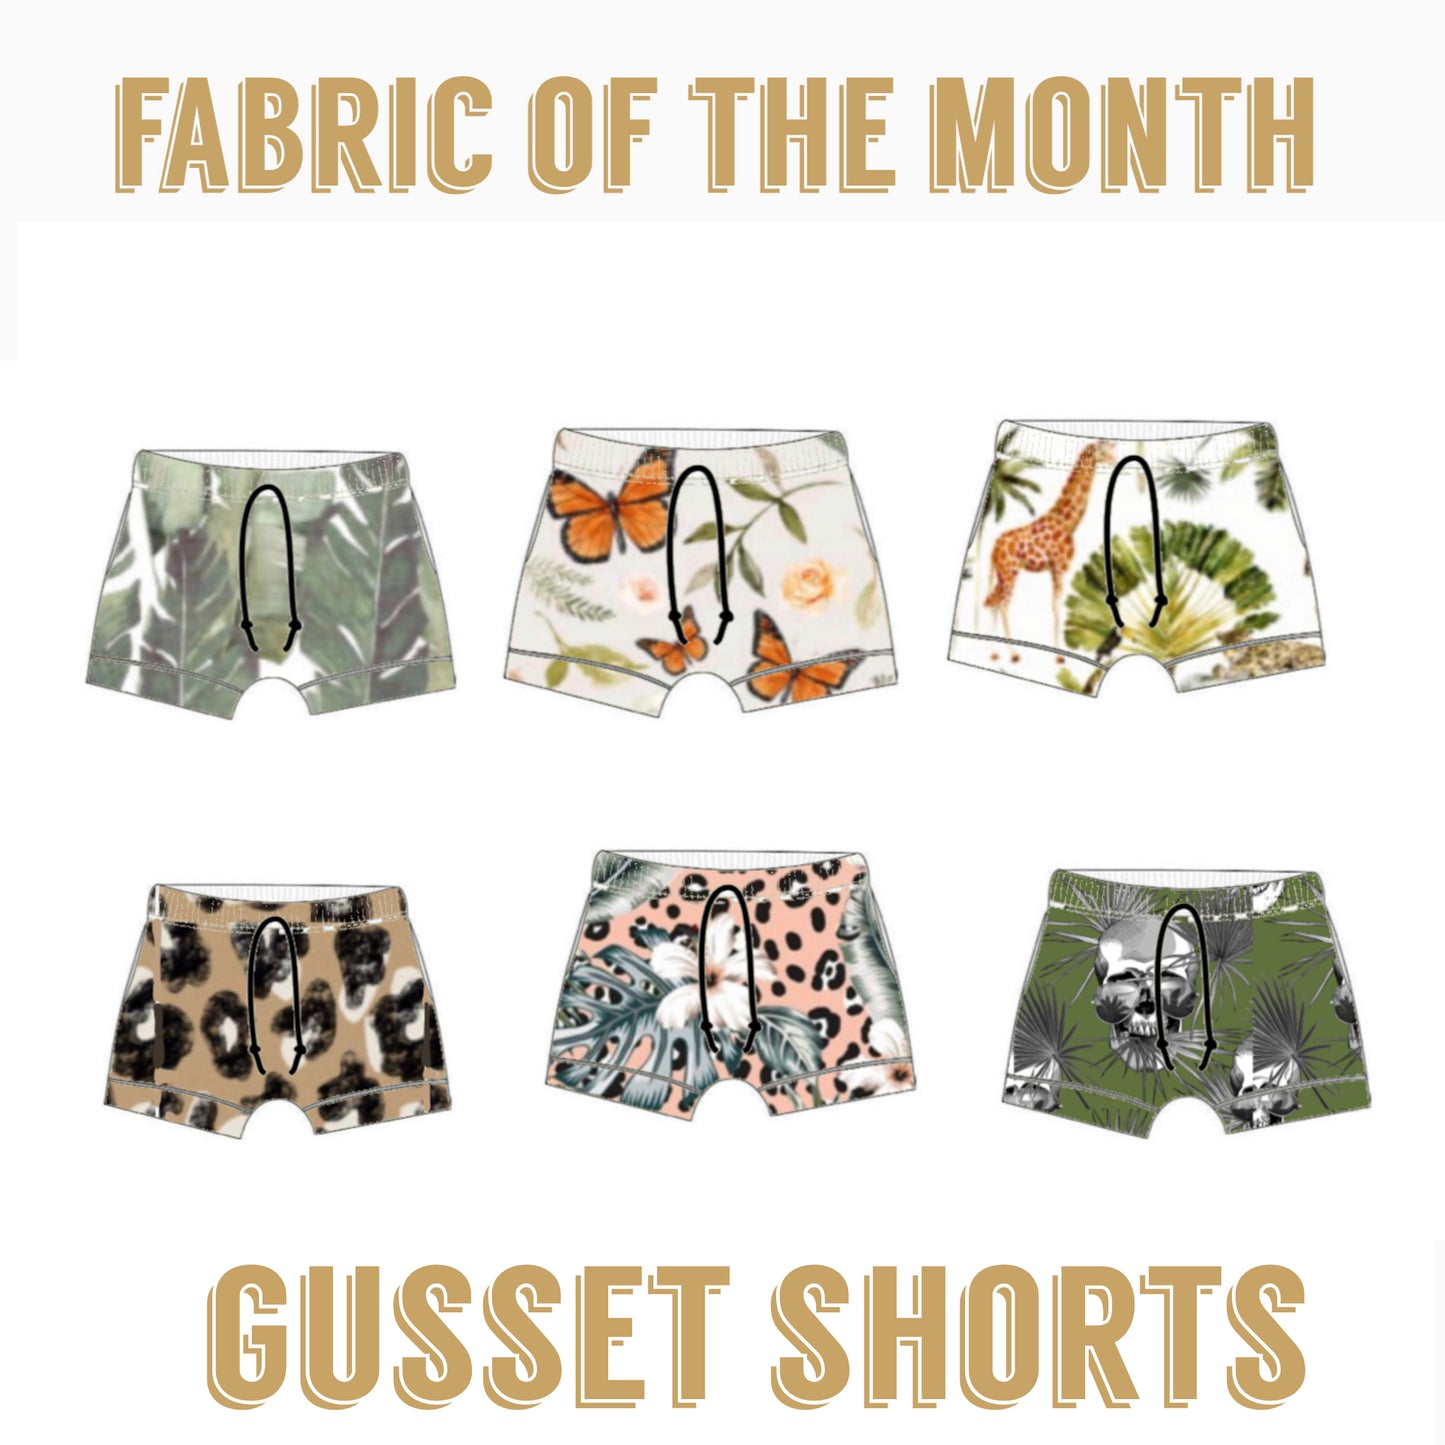 Fabric of the month | Gusset shorts